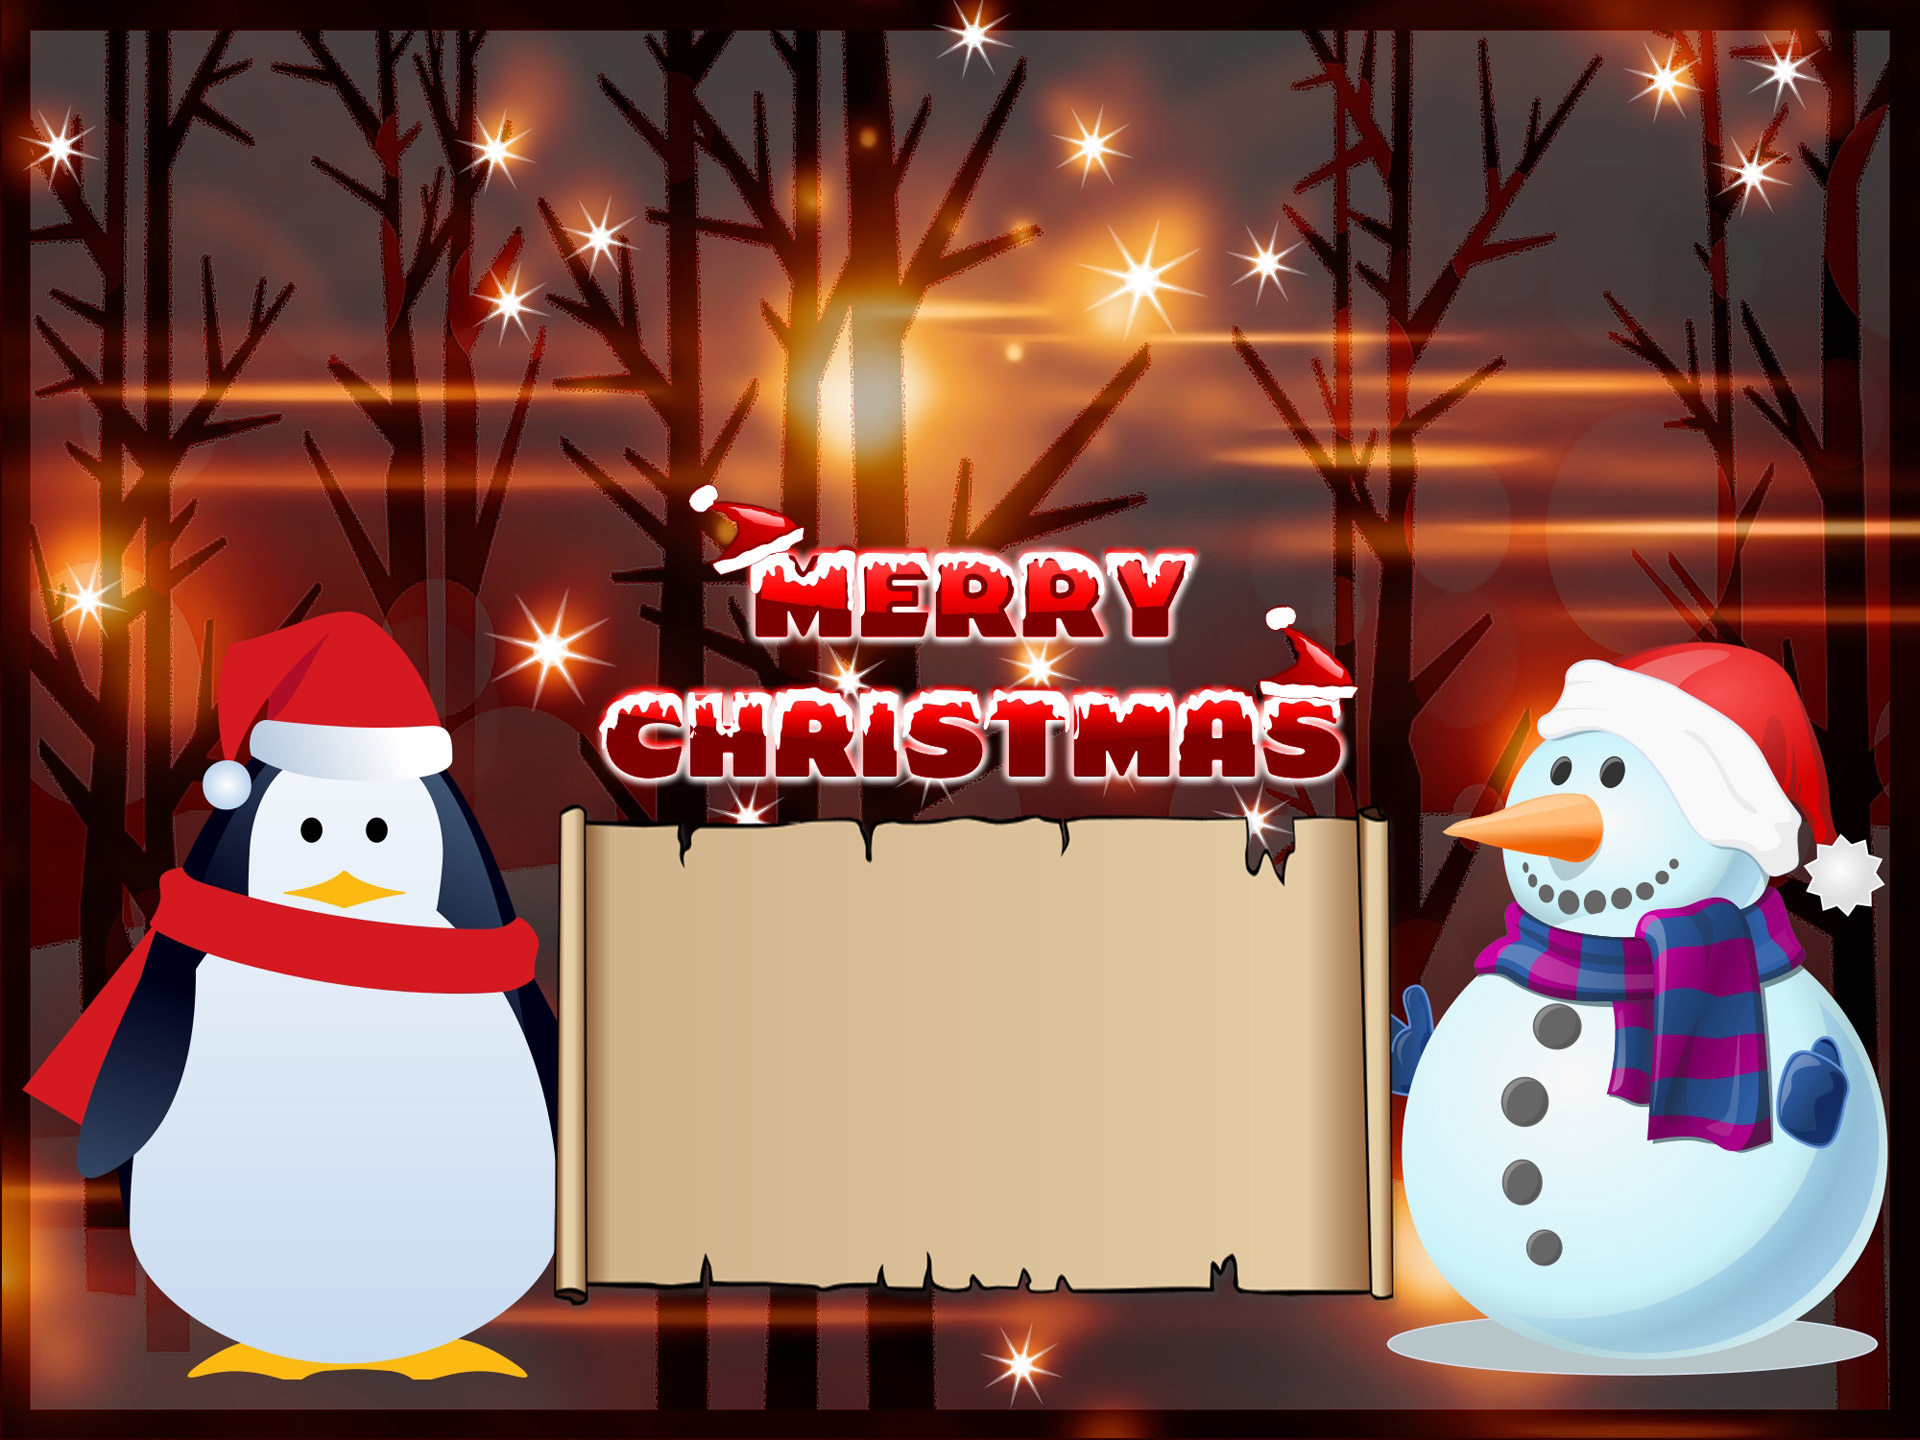 Christmas card background free Openclipart.org